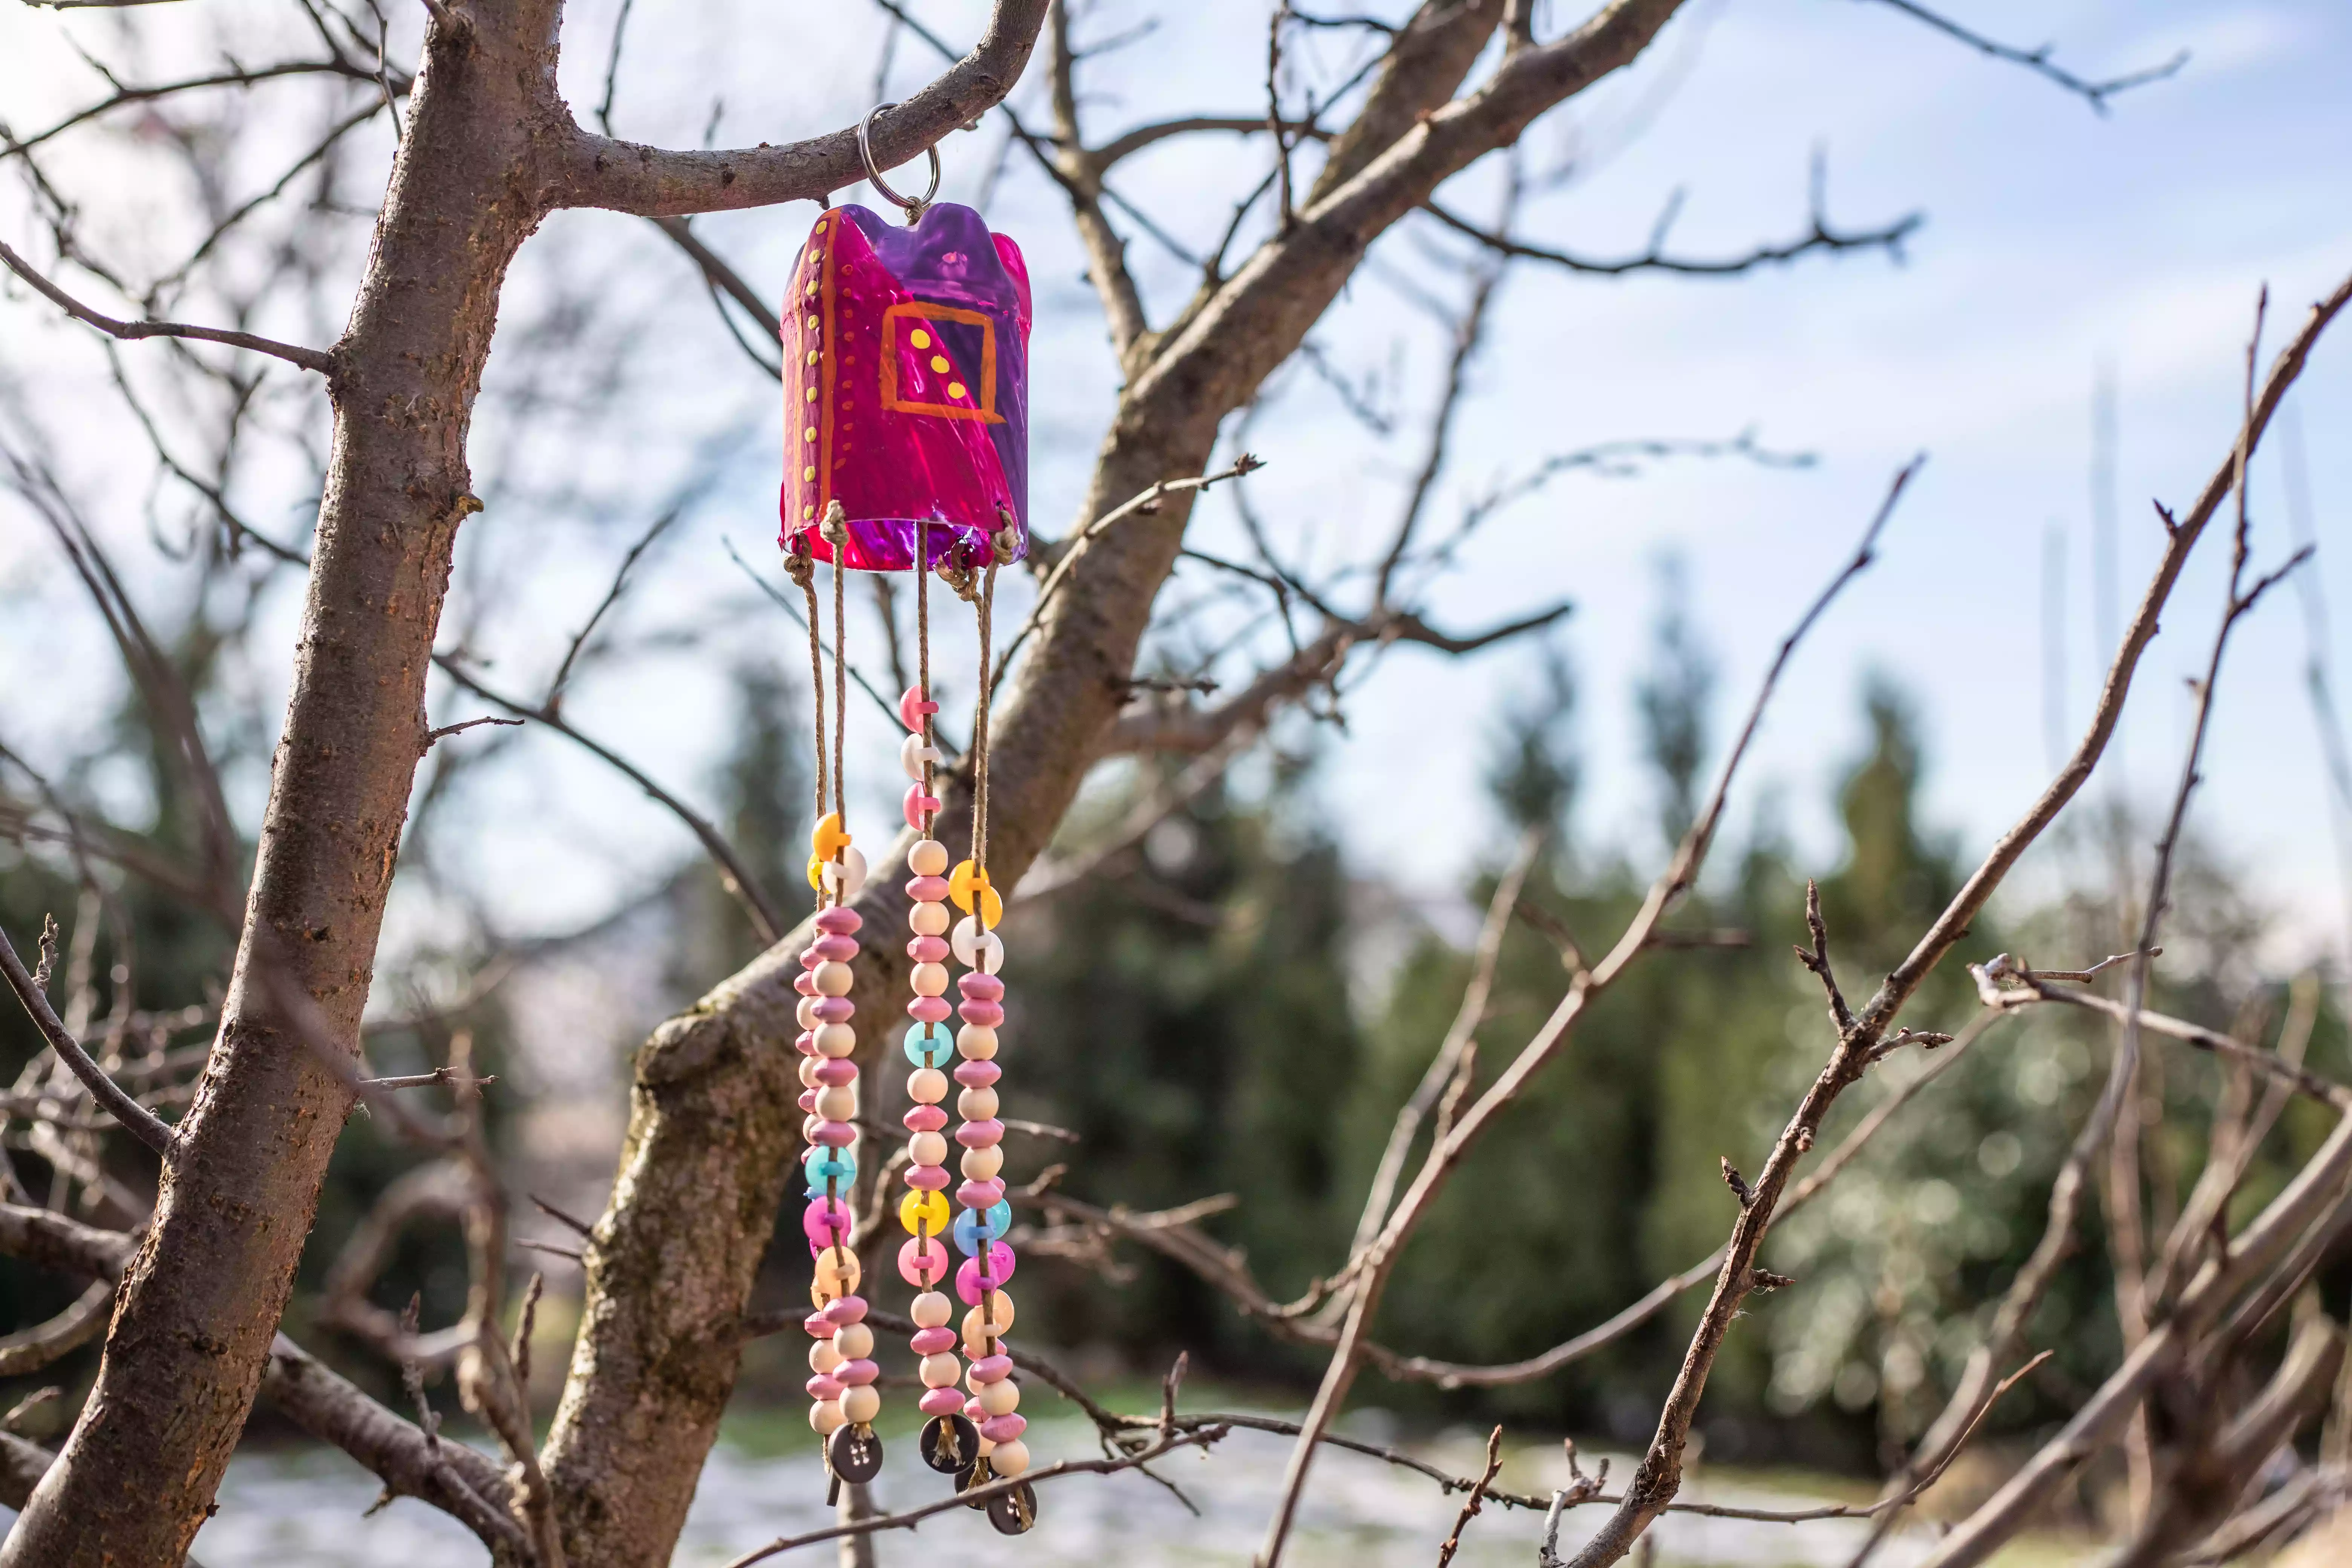 recycled plastic bottle as wind chime hung in tree